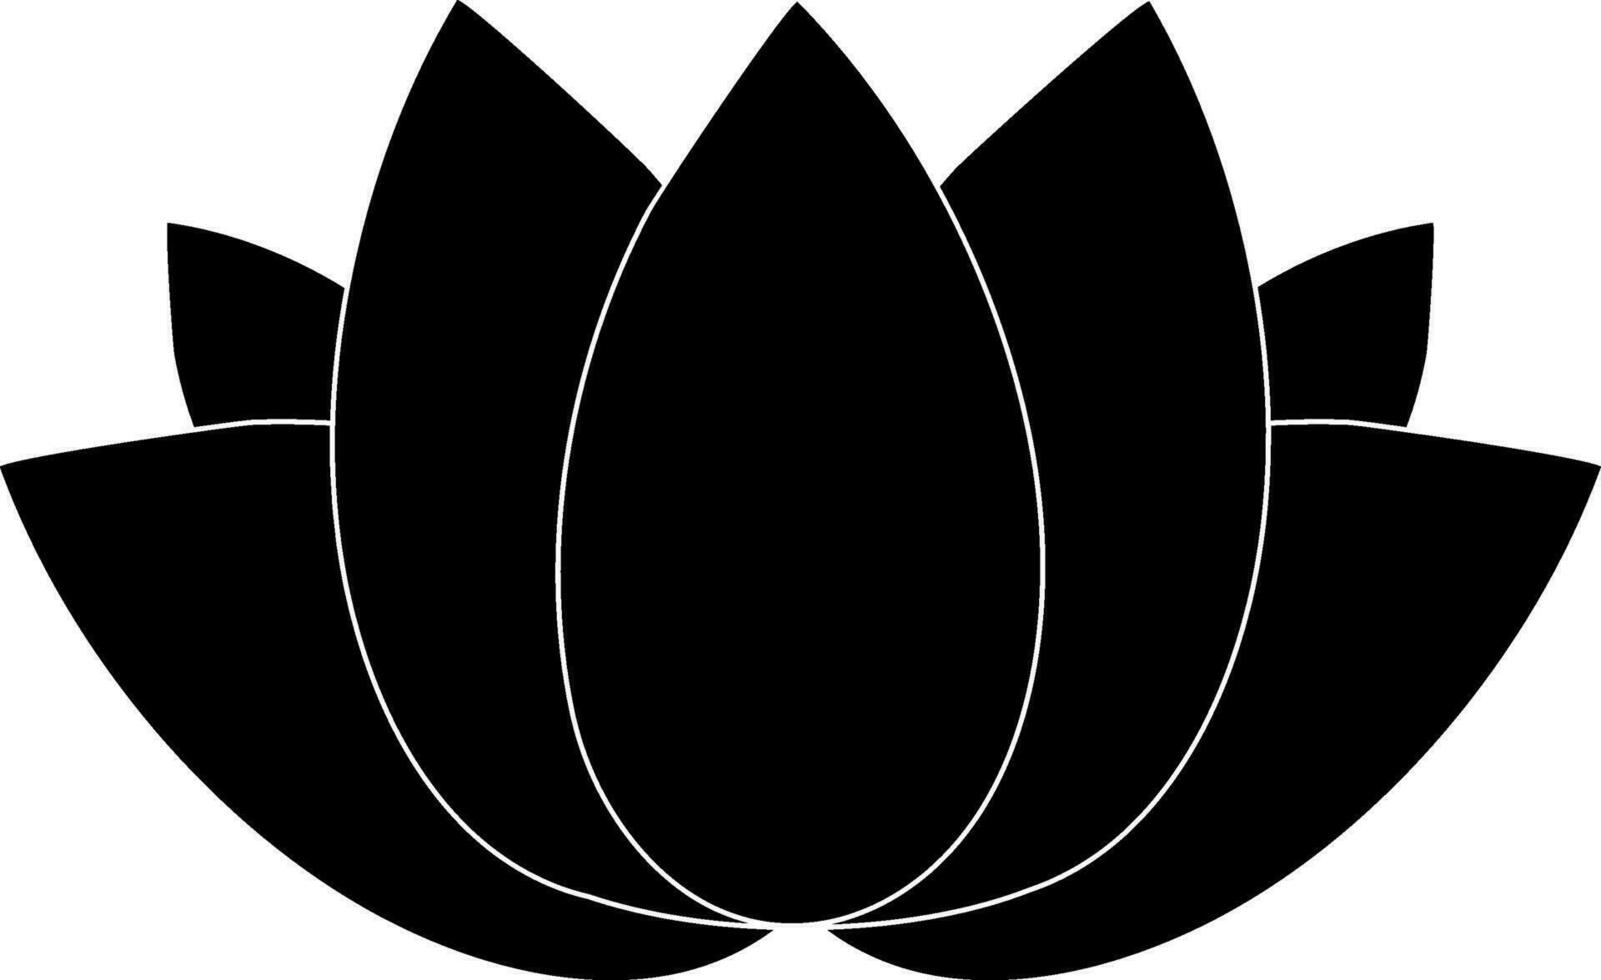 Lotus icon in glyph style for new year concept. vector